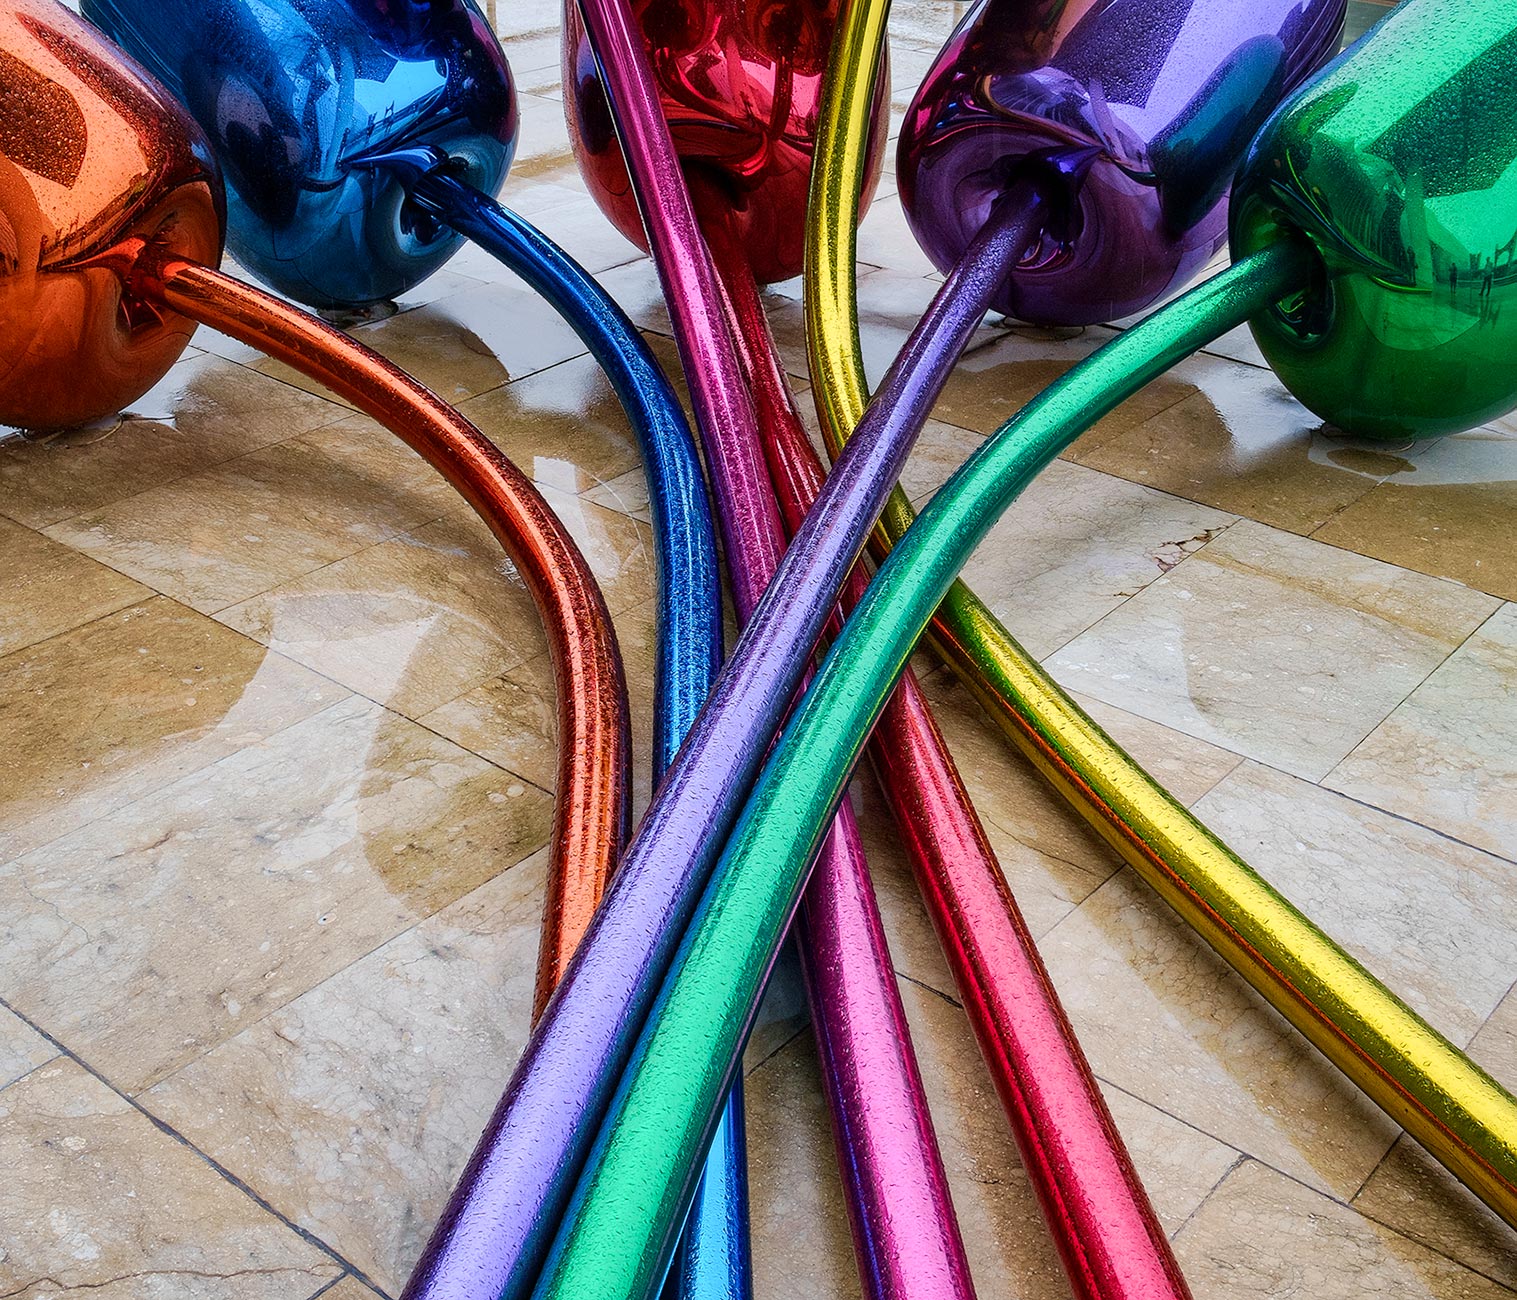 Tulips by Jeff Koons - Fuji X-E1 and 18-55mm lens @ 23mm